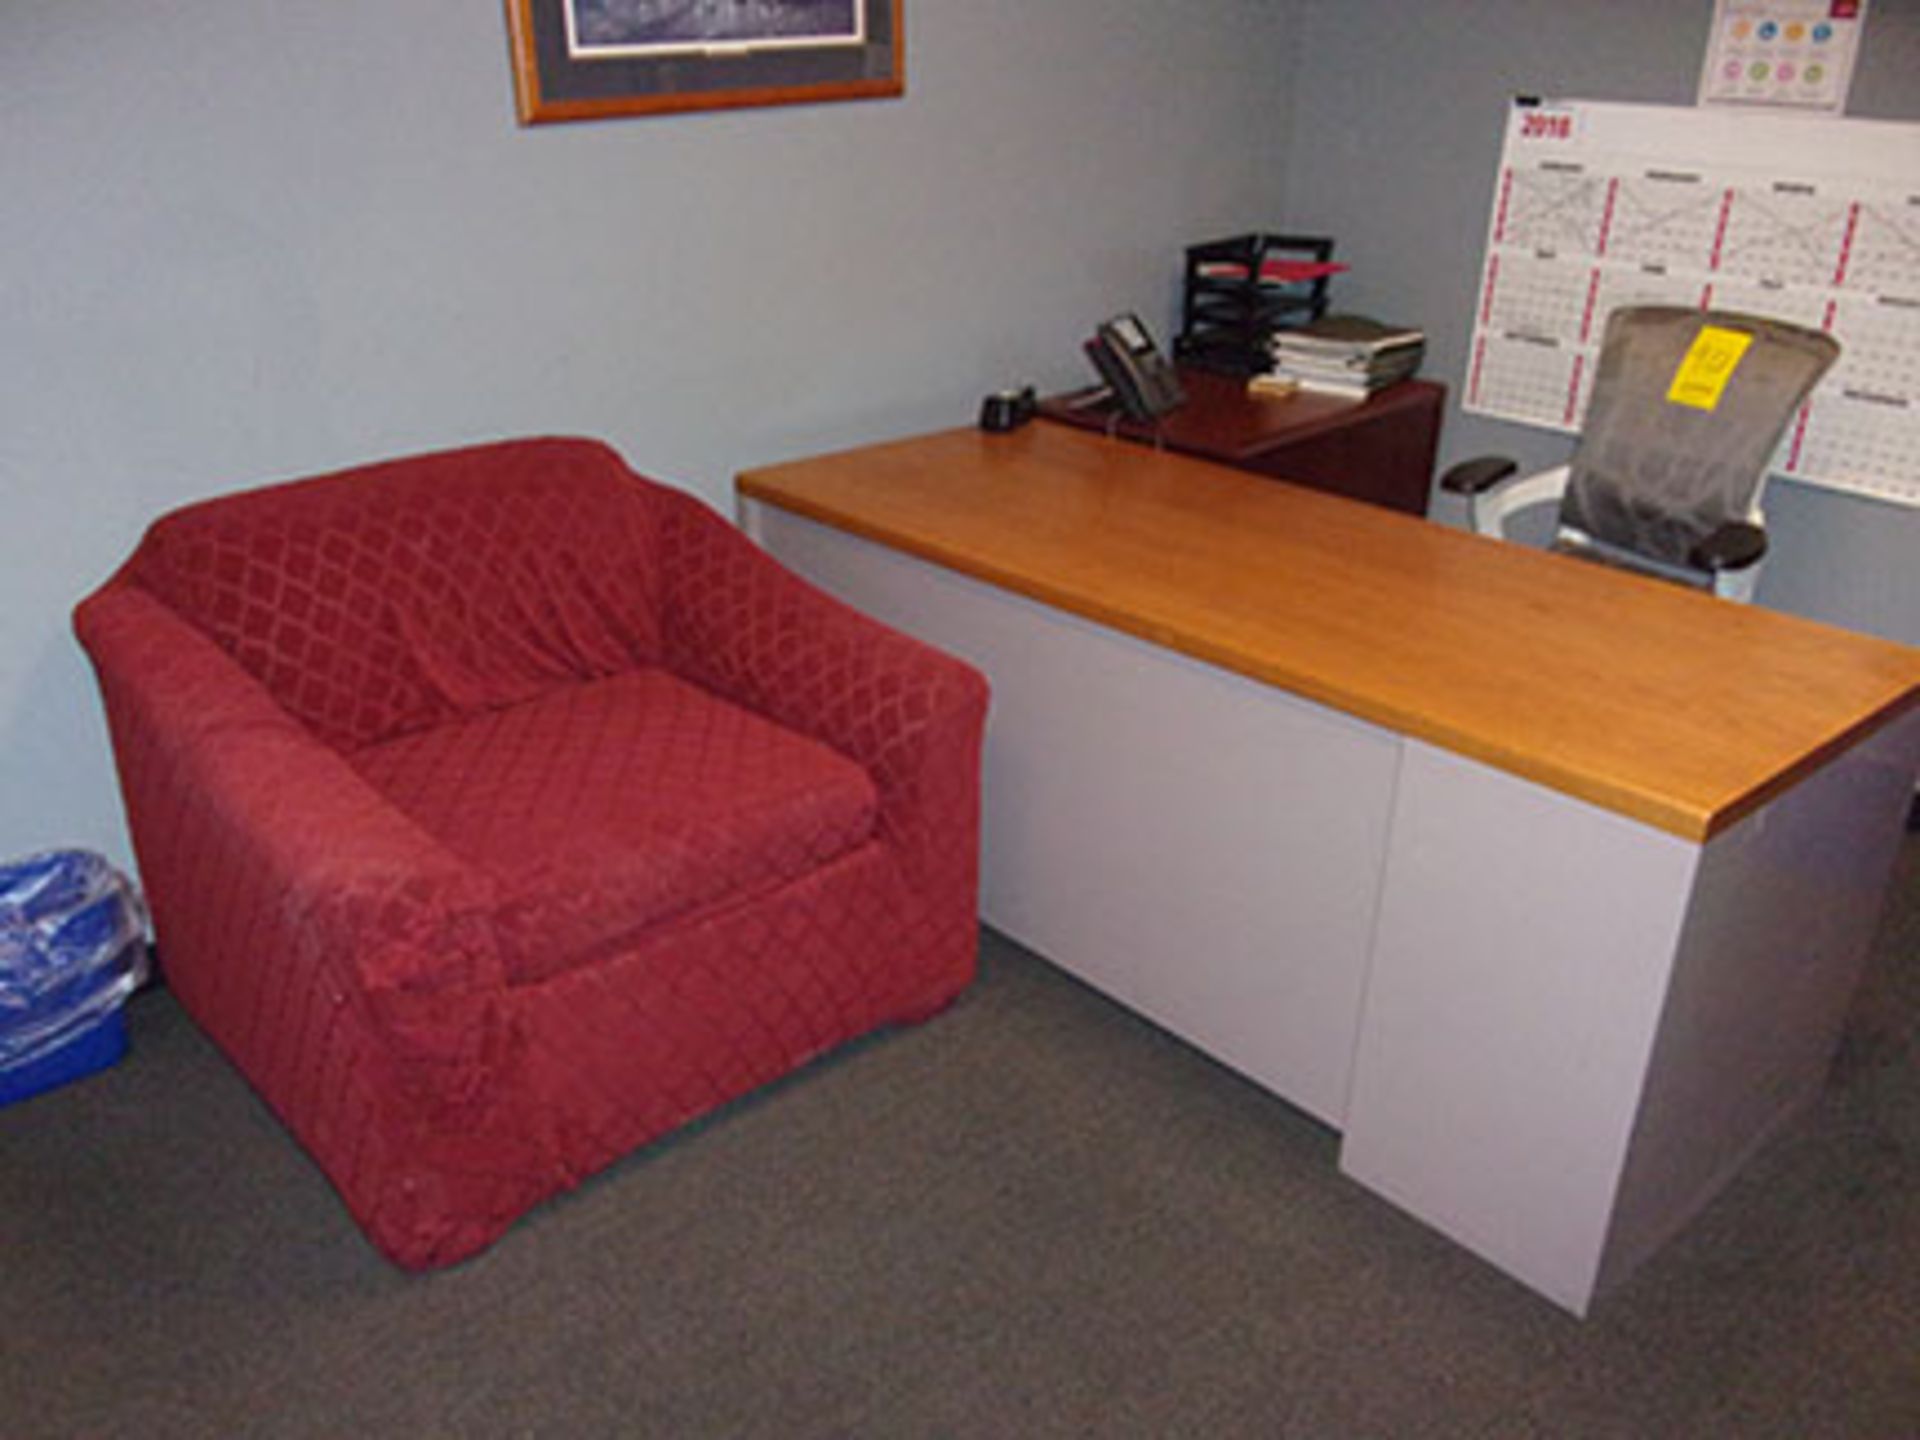 DESK WITH CHAIR, FILING CABINET, WOOD SHELF, TABLE WITH (2) CHAIRS (NO IT EQUIPMENT) - Image 3 of 3